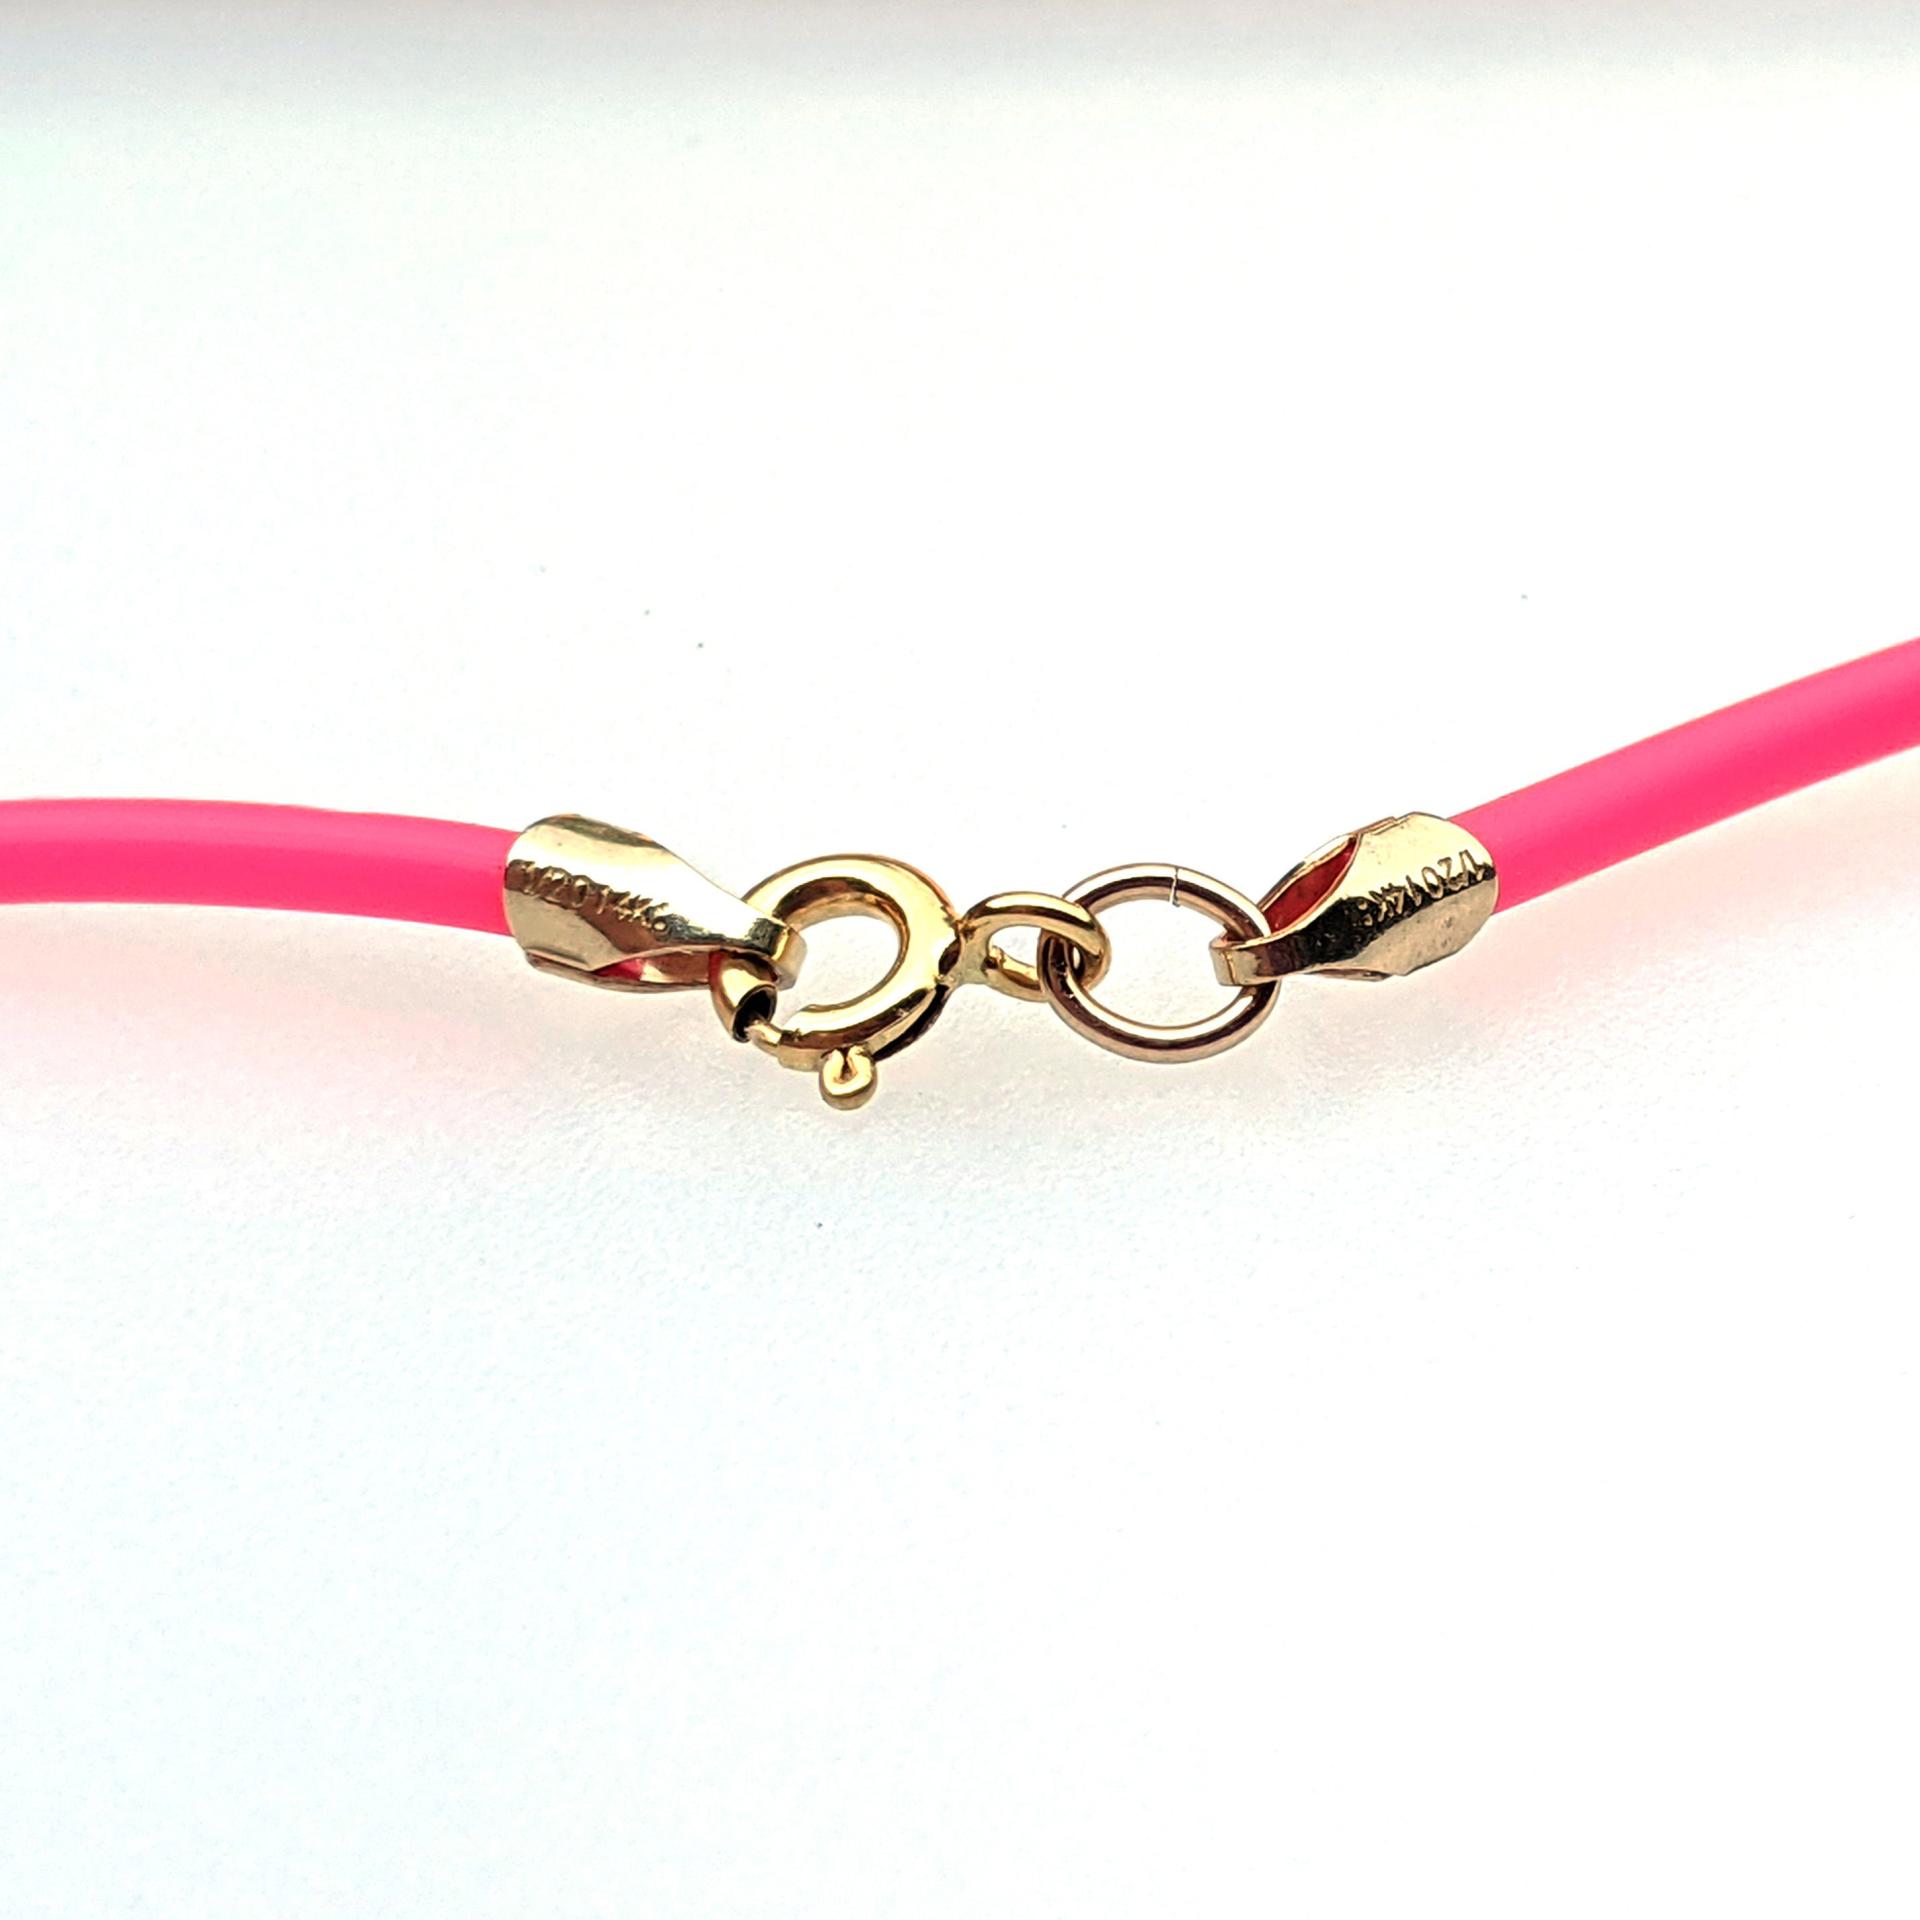 Hot Pink Rubber Cord Necklace, 2mm, Gold Filled Clasp, Interchangeable, 16", 18", 20", 22", 24"